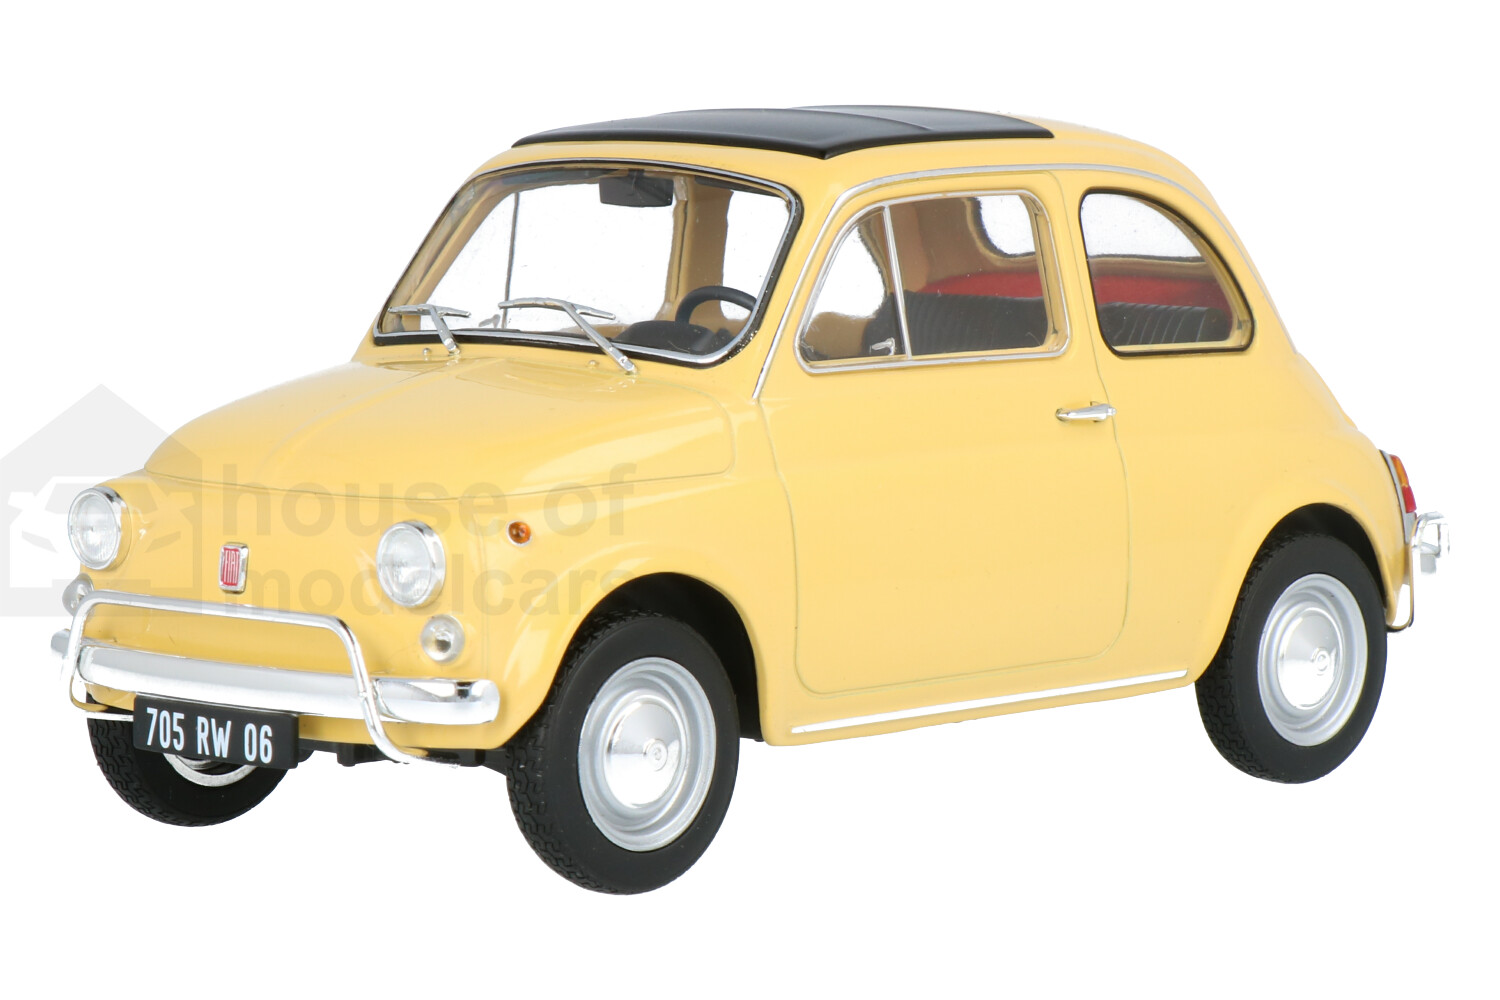 Fiat-500L-187772_13153551091877721-NorevFiat-500L-187772_Houseofmodelcars_.jpg